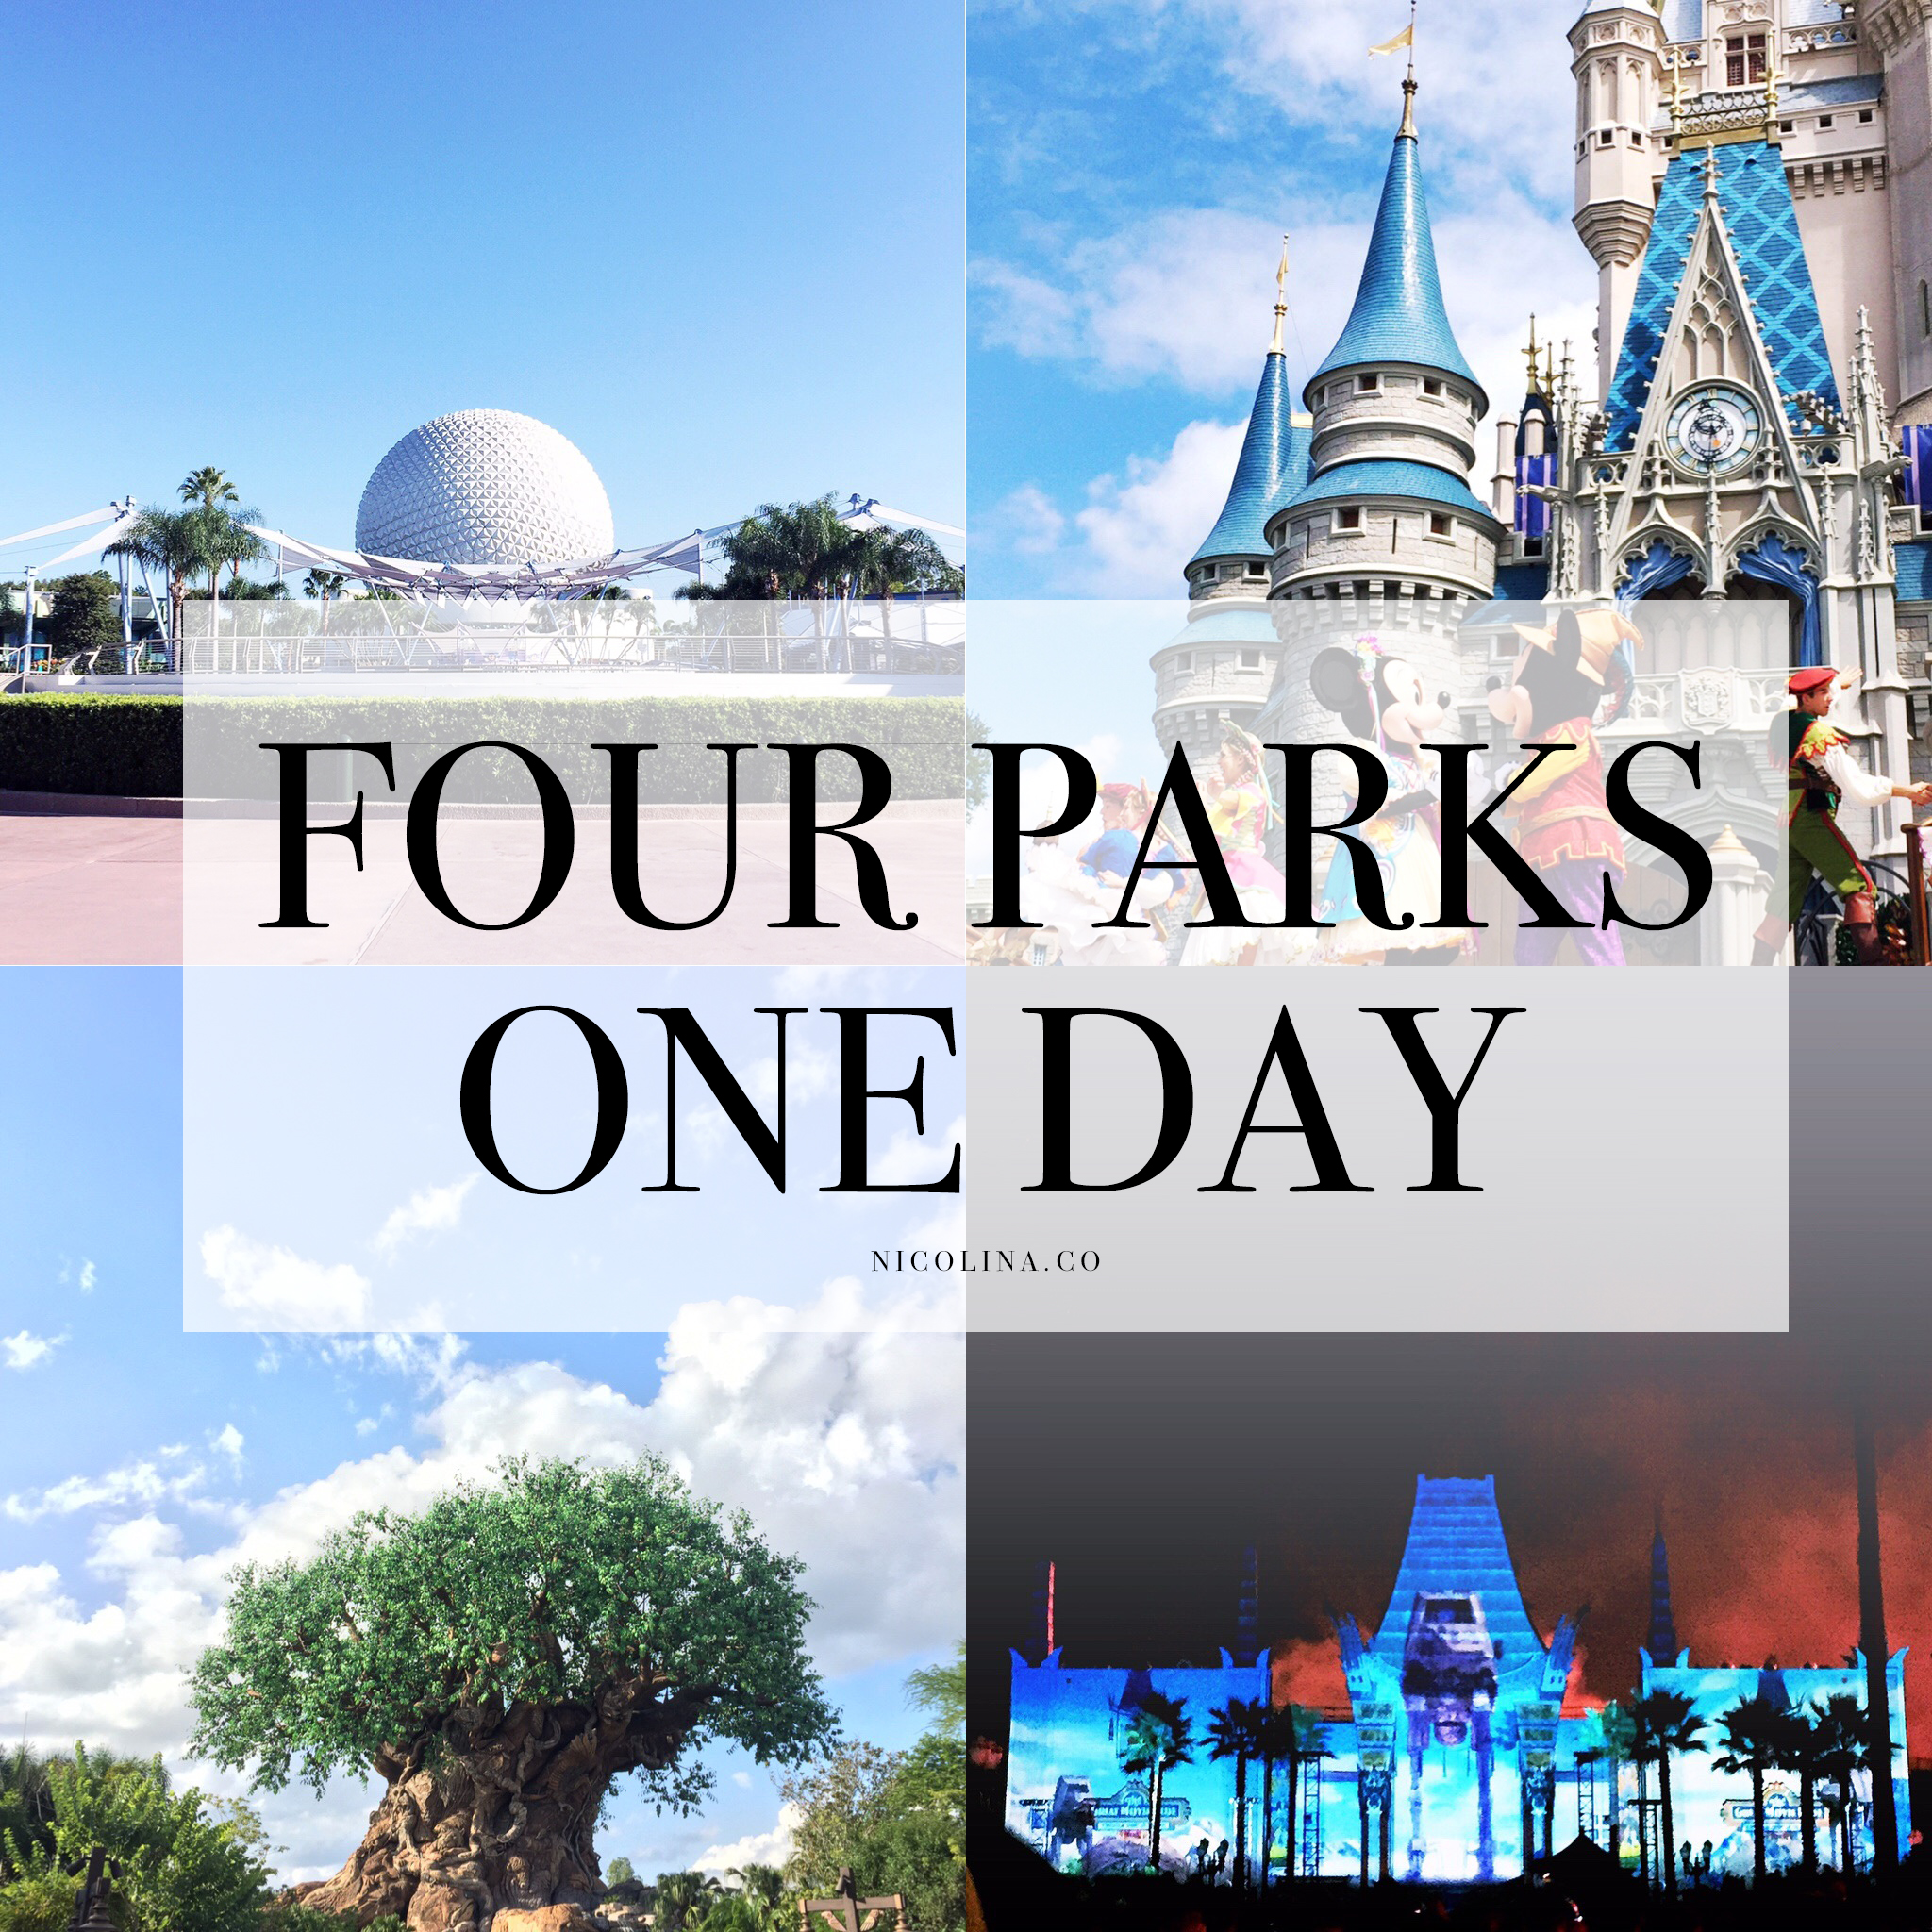 Four Parks One Day